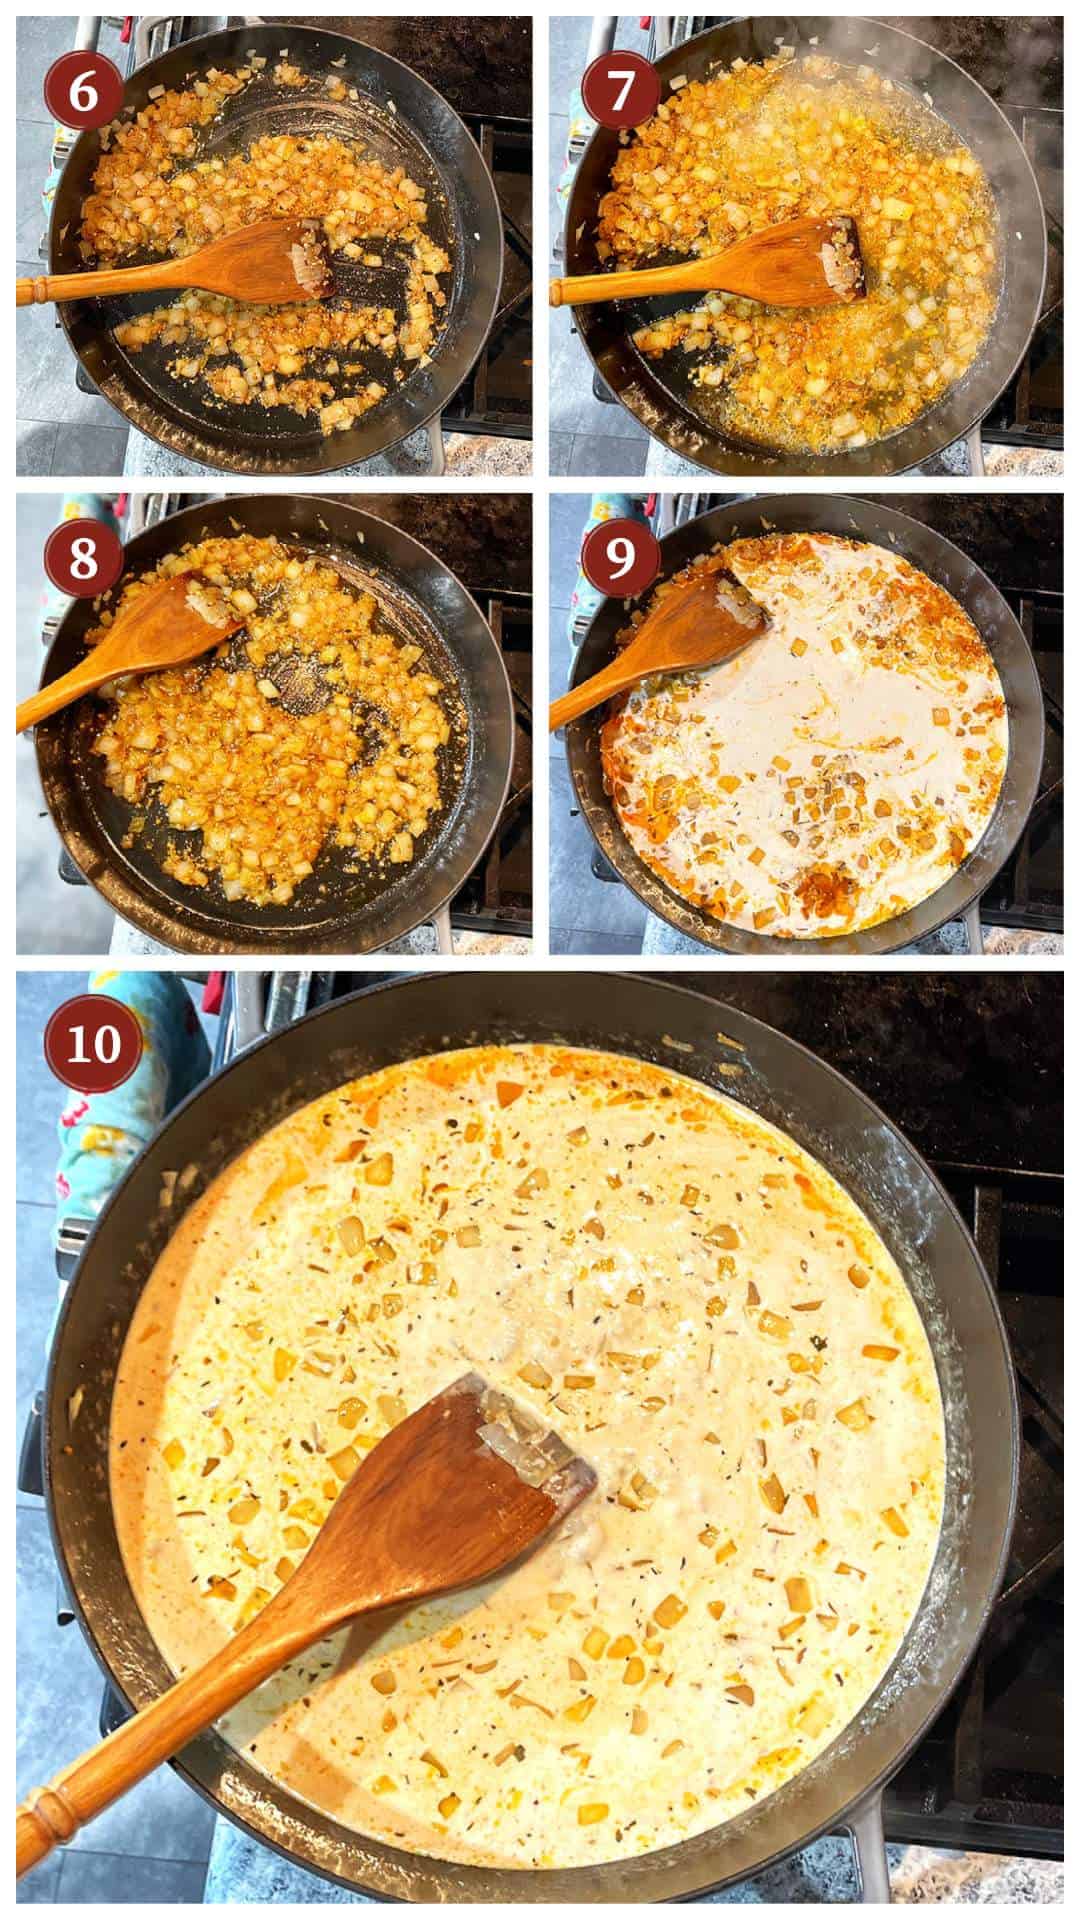 A collage of images showing how to make crawfish monica sauce, steps 6 - 10.